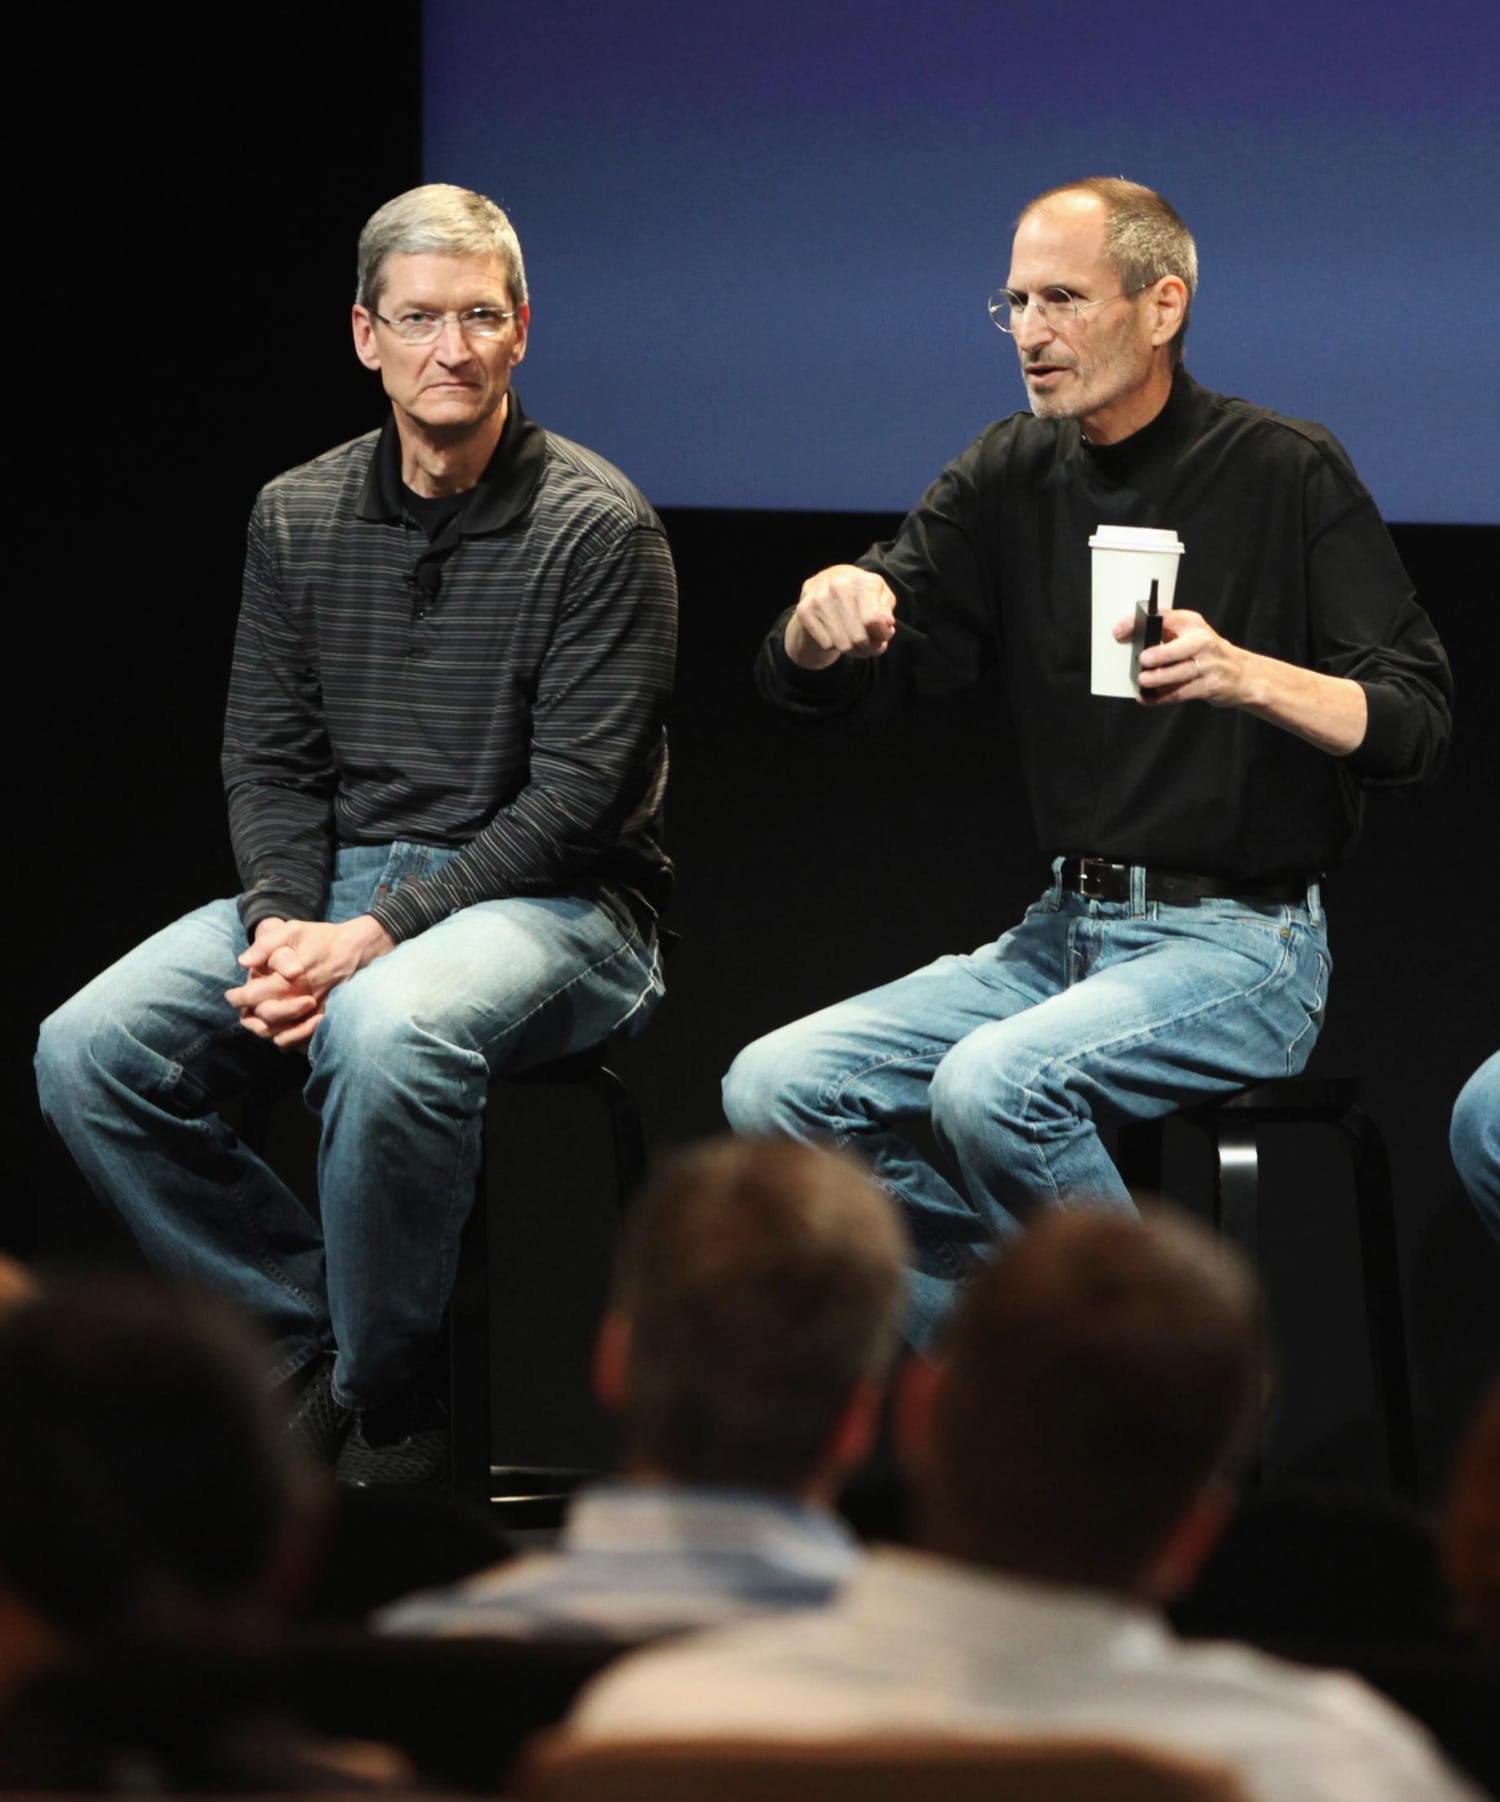 Steve Jobs Refused Liver from CEO Tim Cook